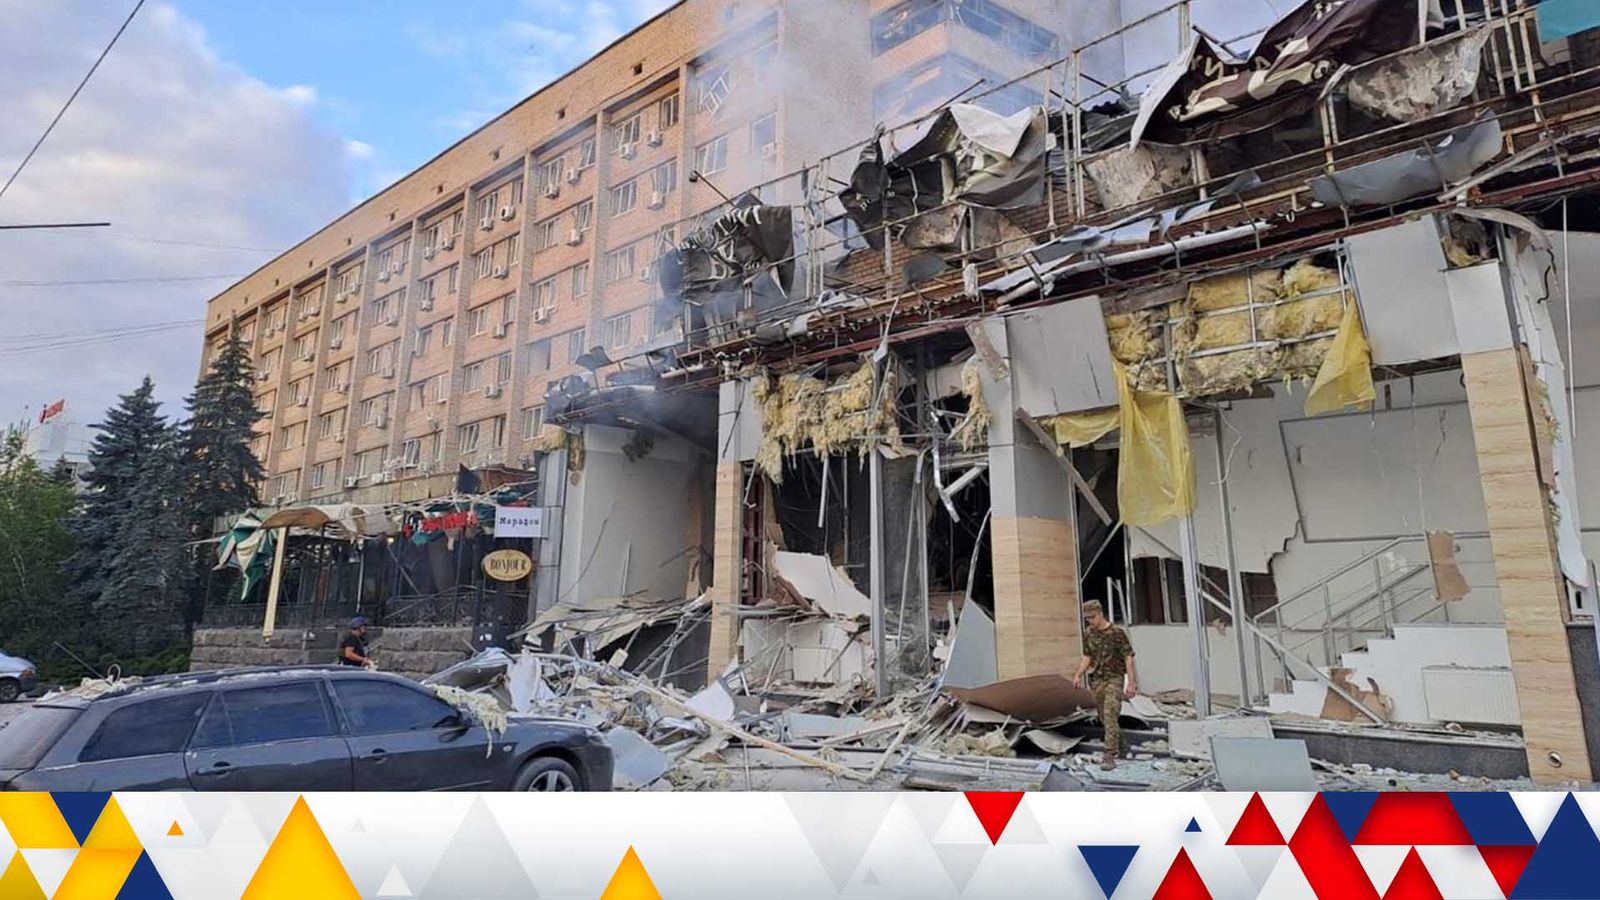 Ukraine war: Russian missile 'designed to bring down a plane' hits crowded pizza restaurant in Kramatorsk